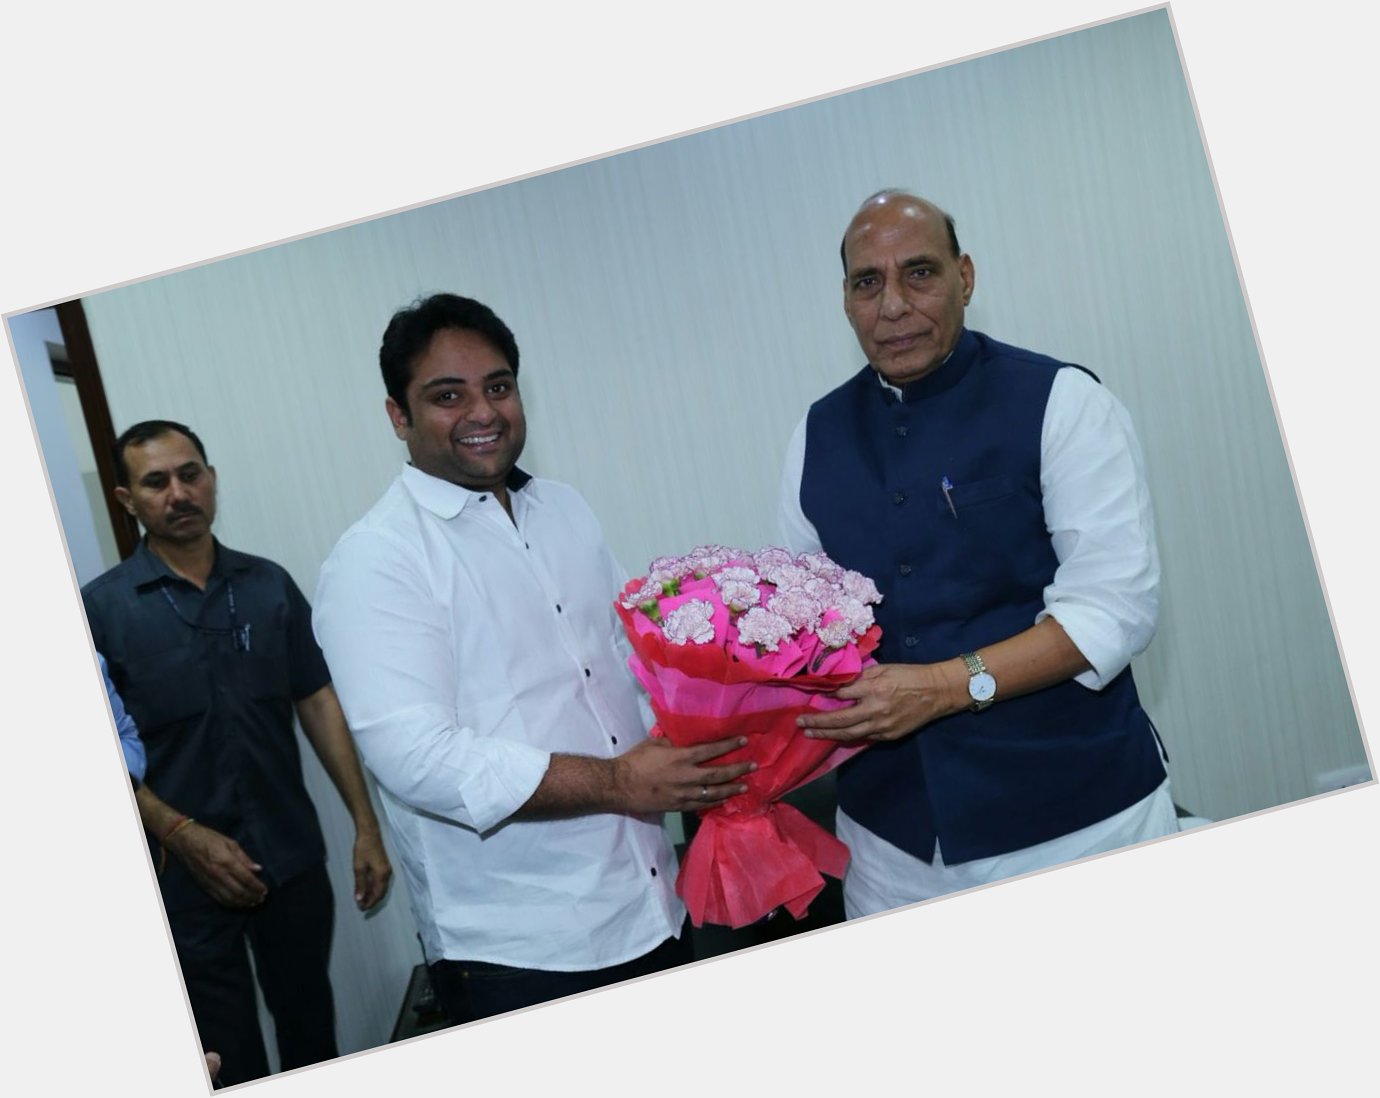 Wishing RAJNATH SINGH ji a very happy birthday and great service to the nation      